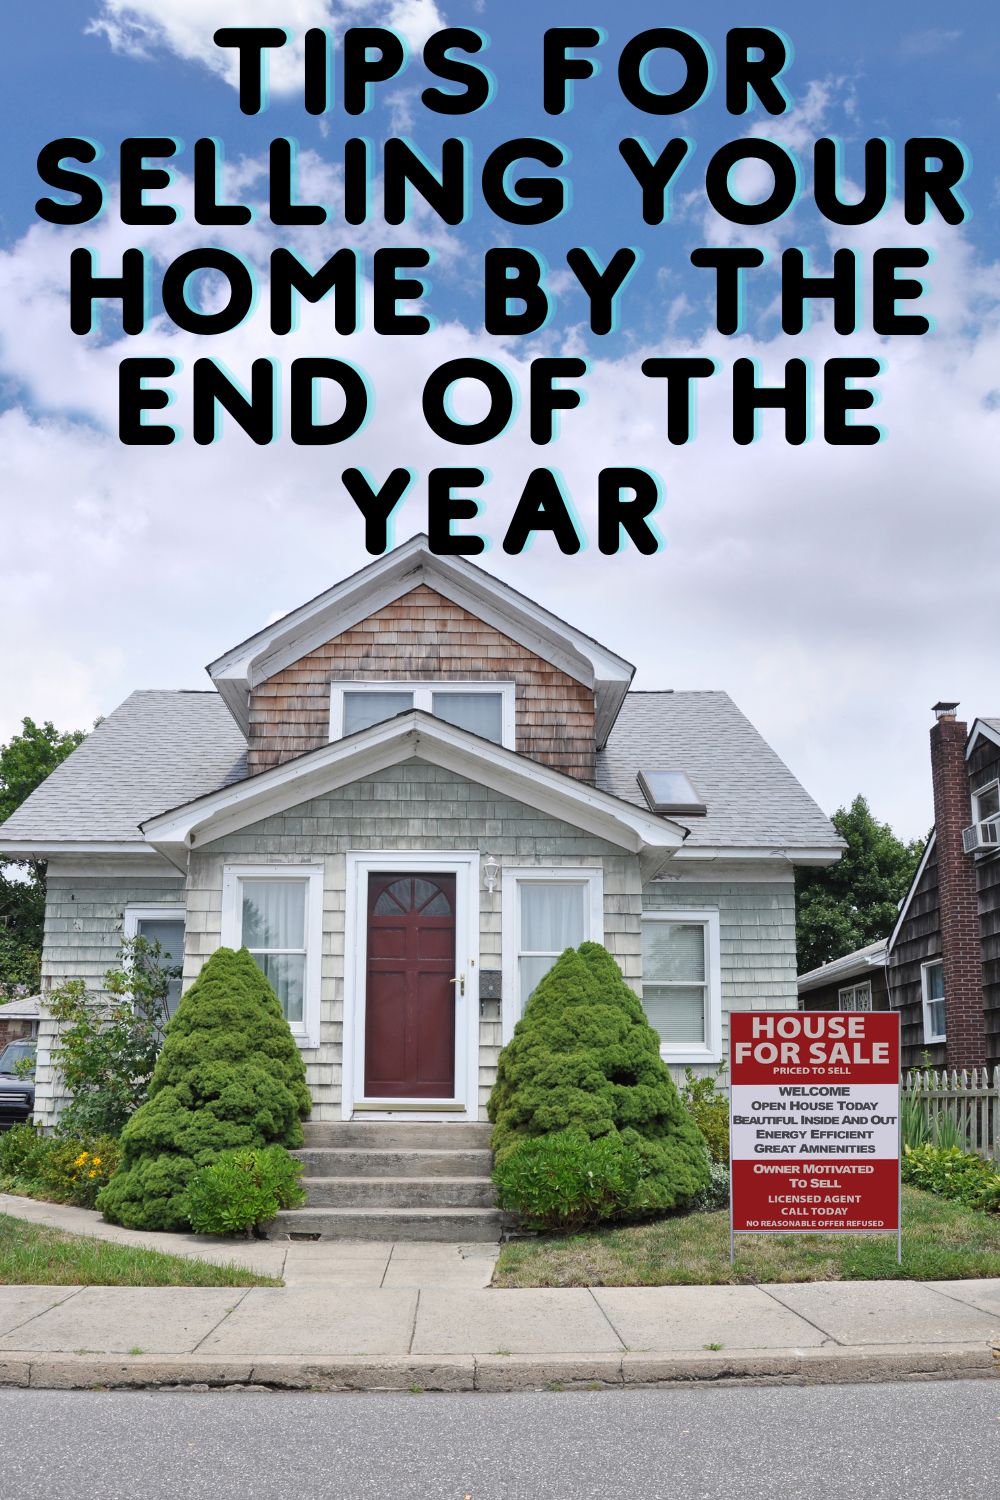 Tips for Selling Your Home By the End of the Year